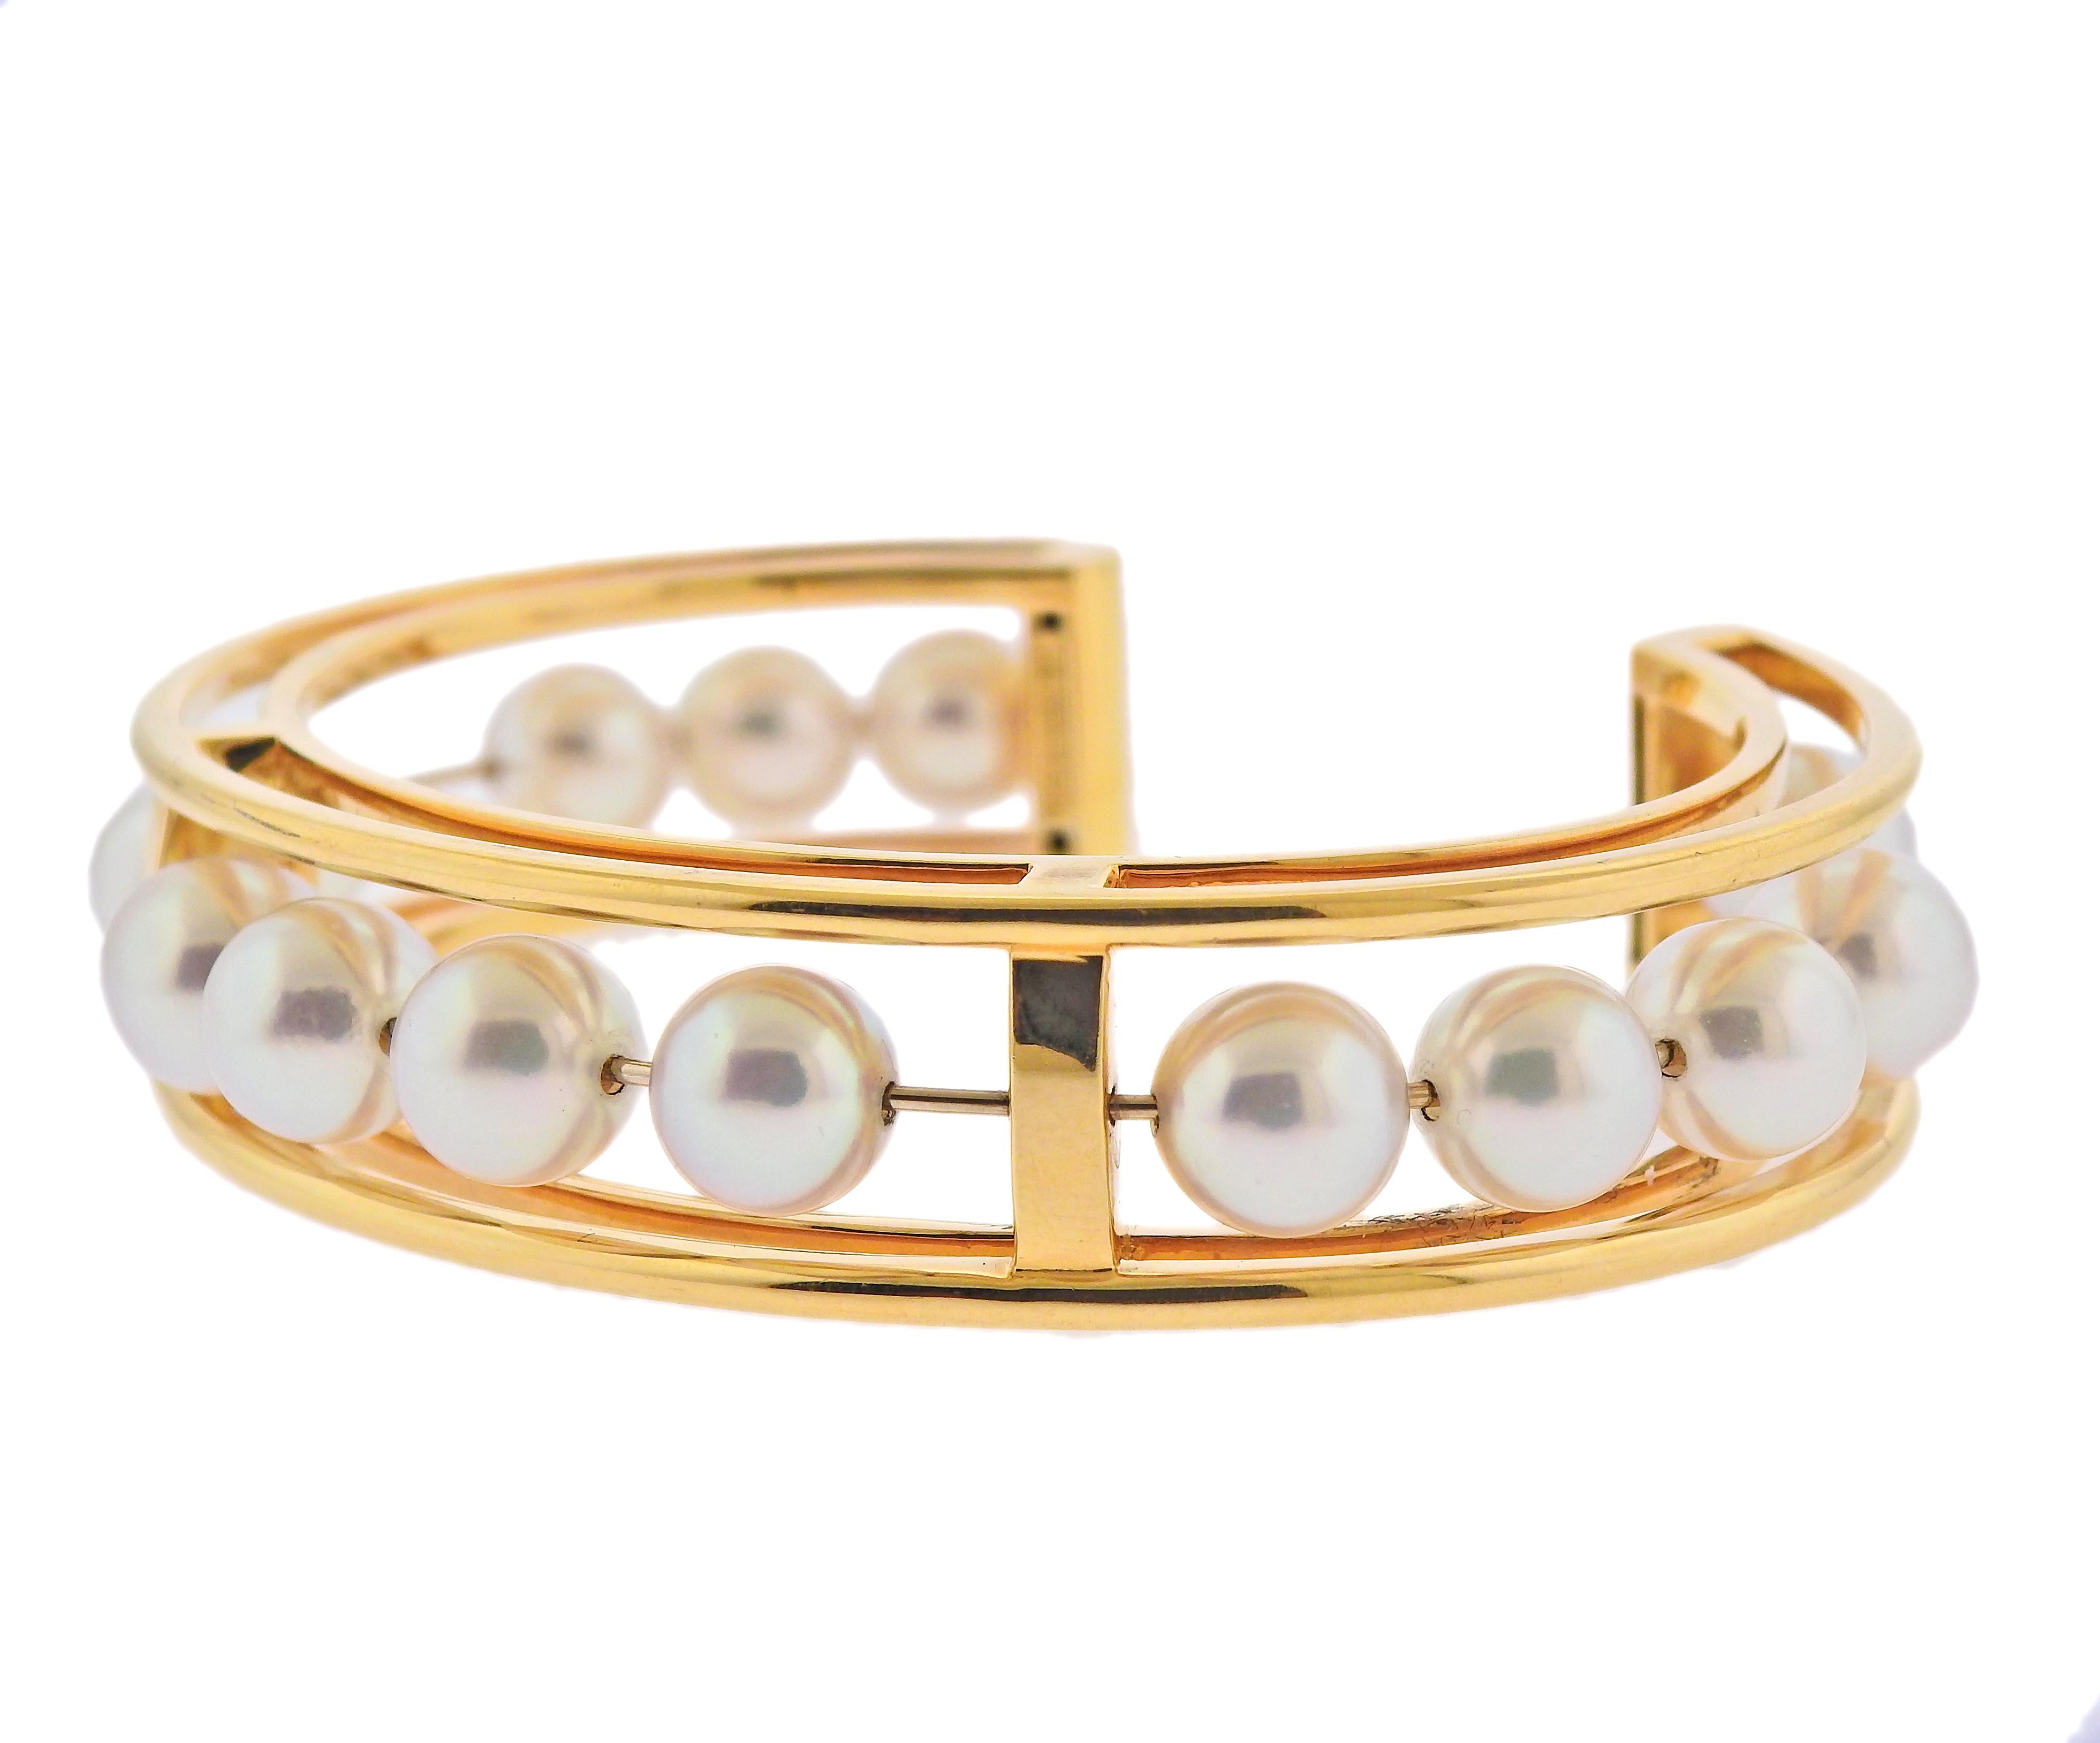 18k yellow gold Pearl bracelet by Valentin Magro,  Brand new without tags. Retail - $17300. : Bracelet will fit approx. 7.25